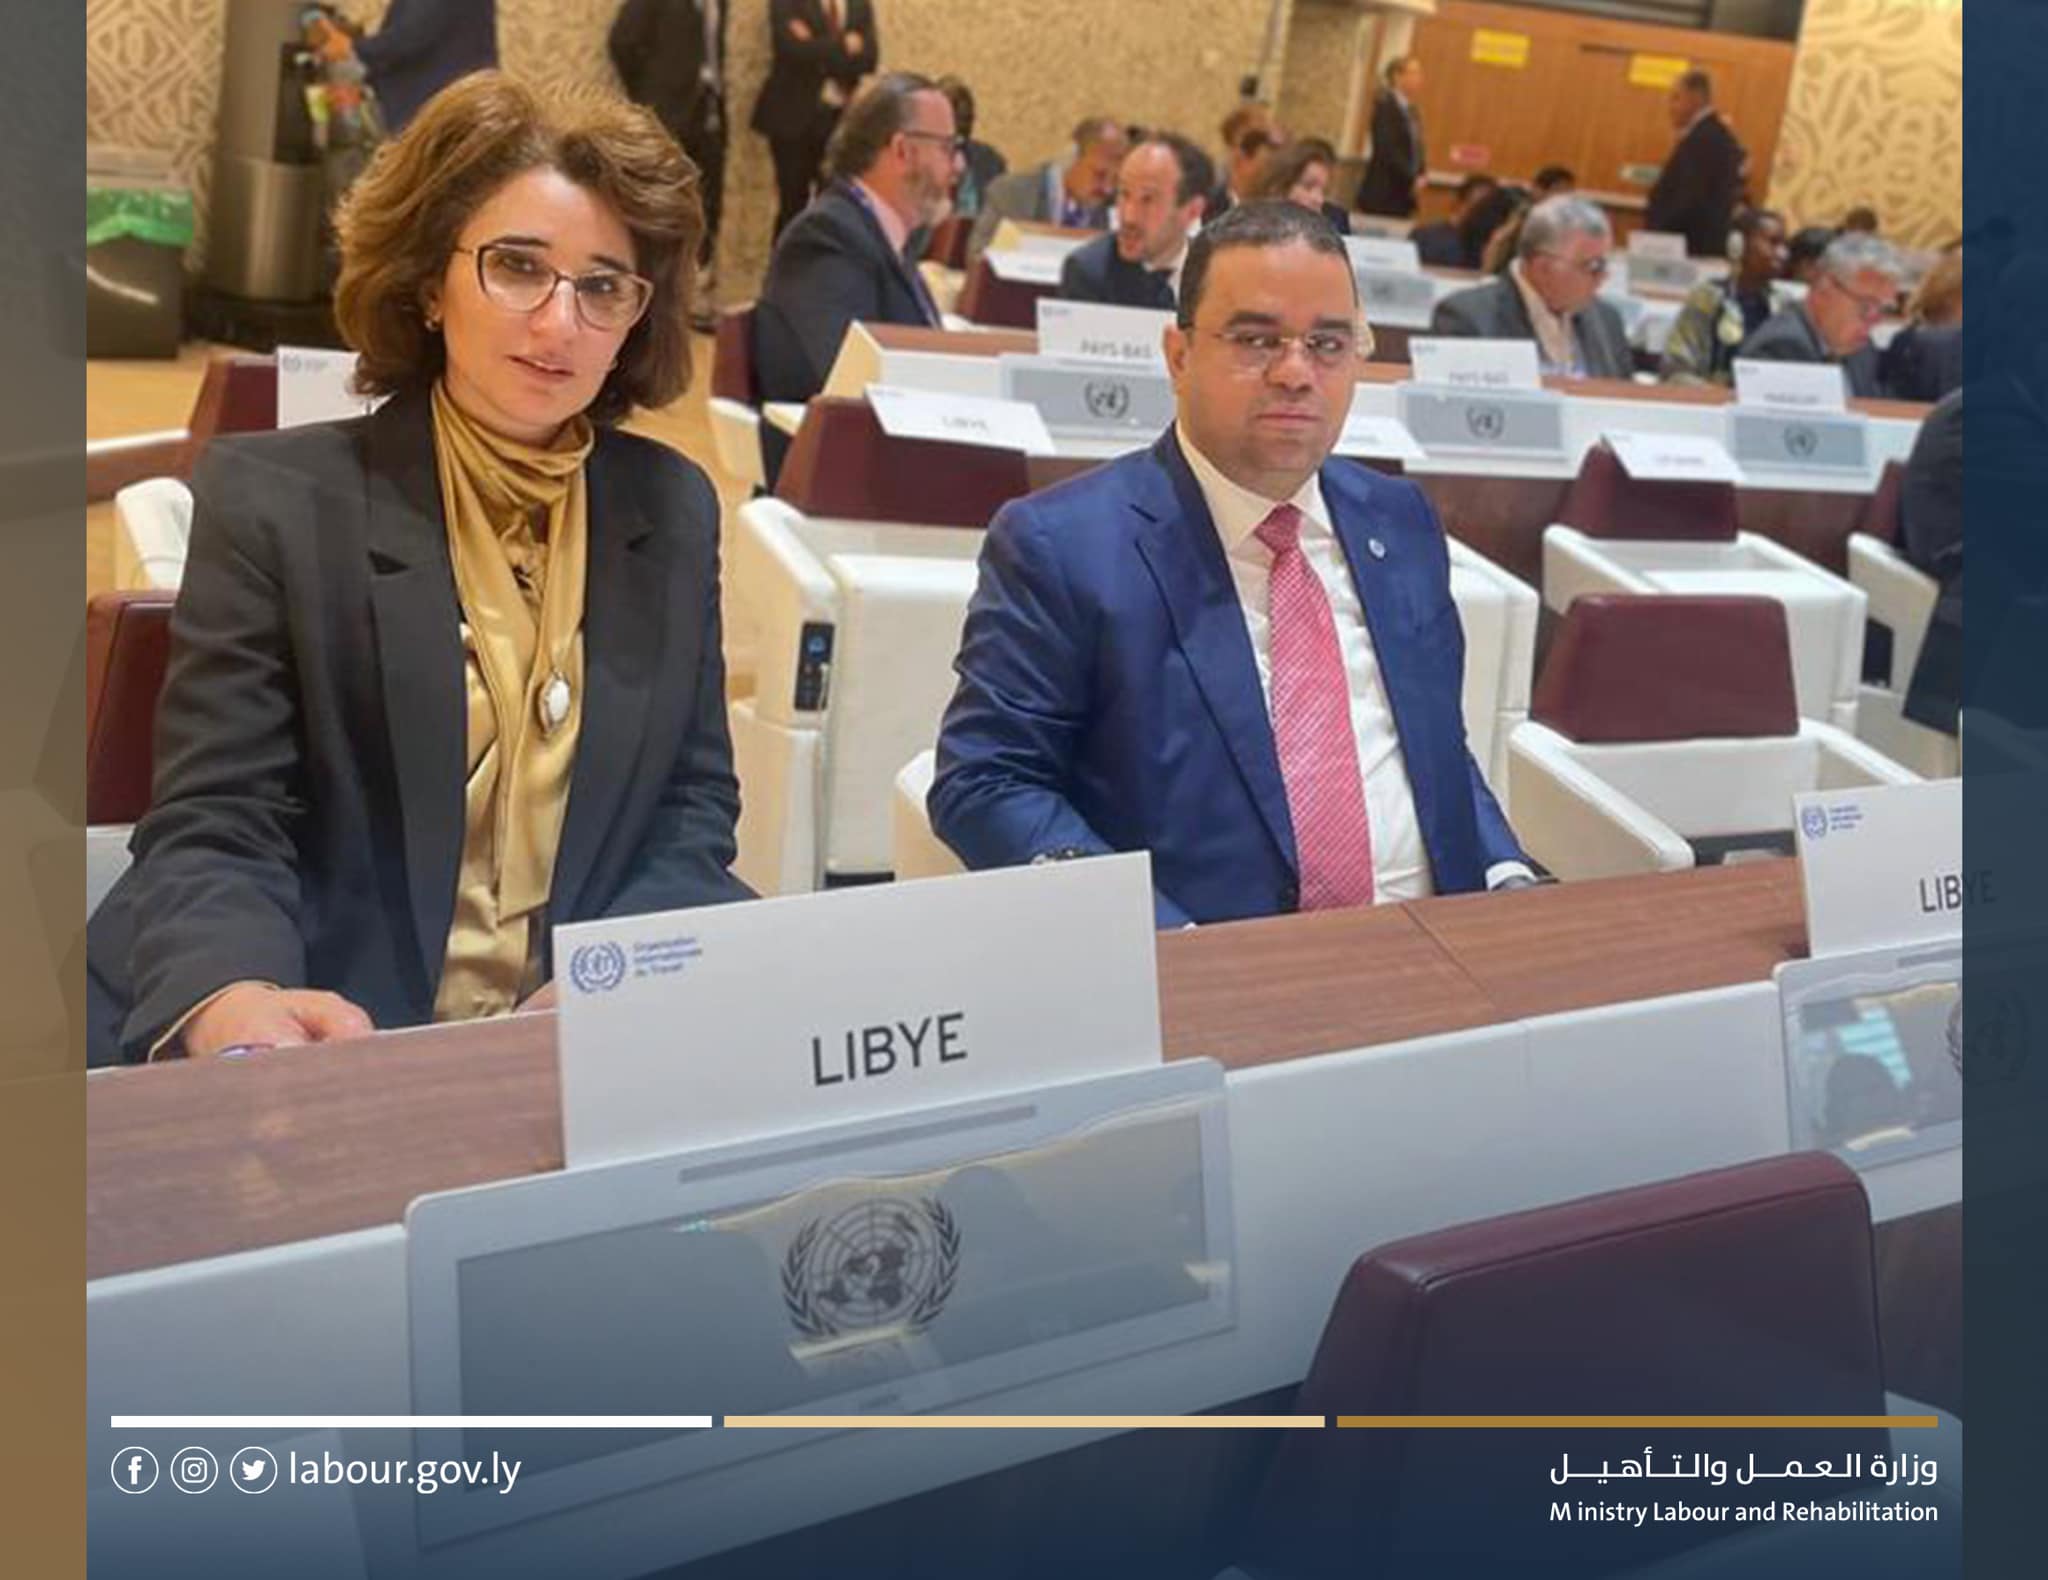 The Minister of Labor and Rehabilitation participates in the opening of the International Labor Conference at its 111th session in Geneva.